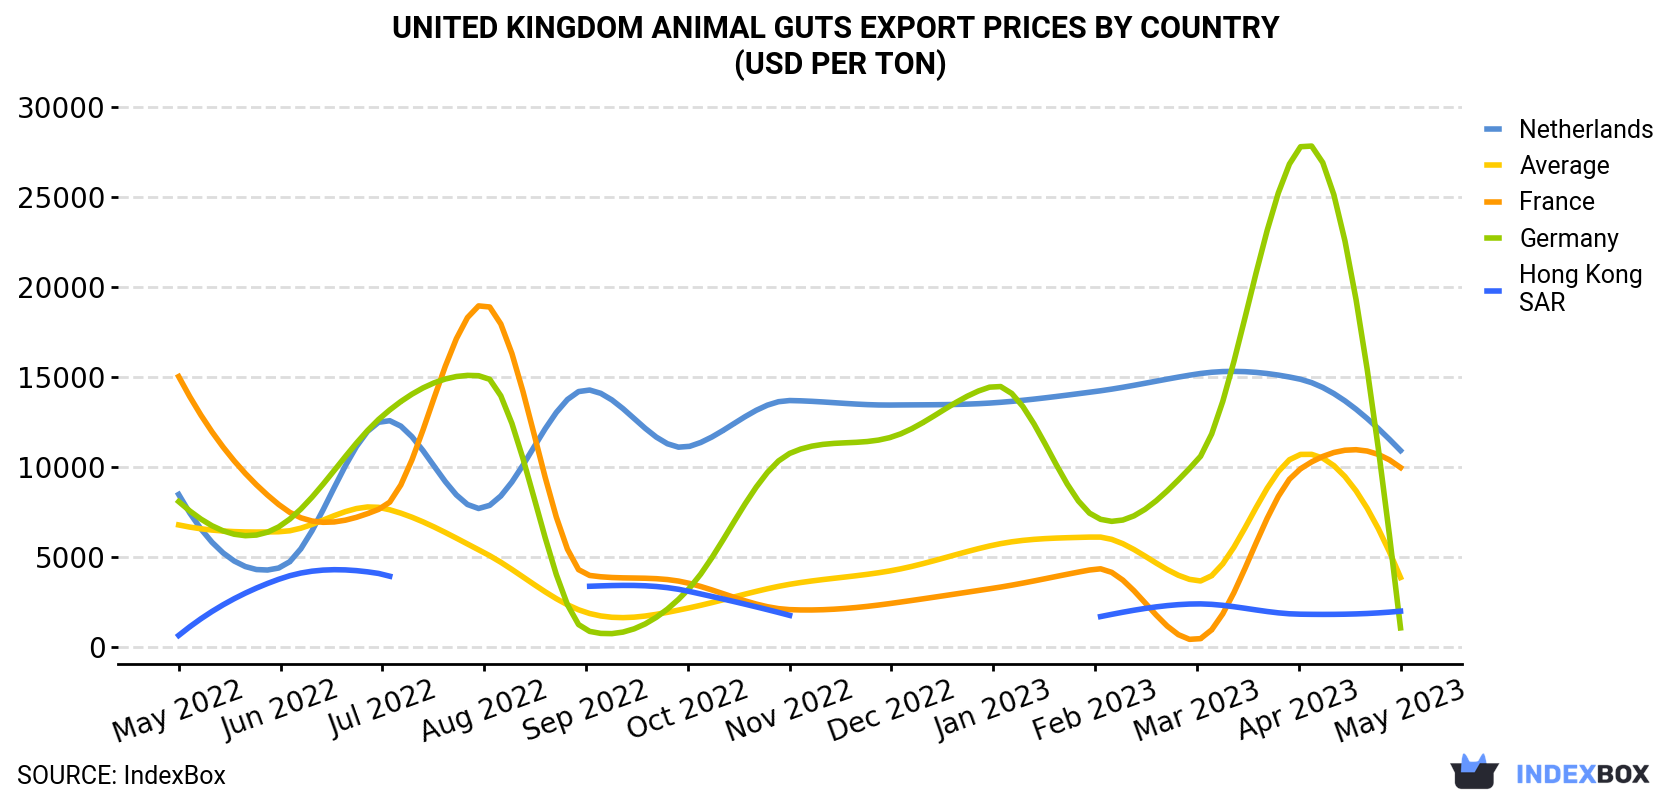 United Kingdom Animal Guts Export Prices By Country (USD Per Ton)